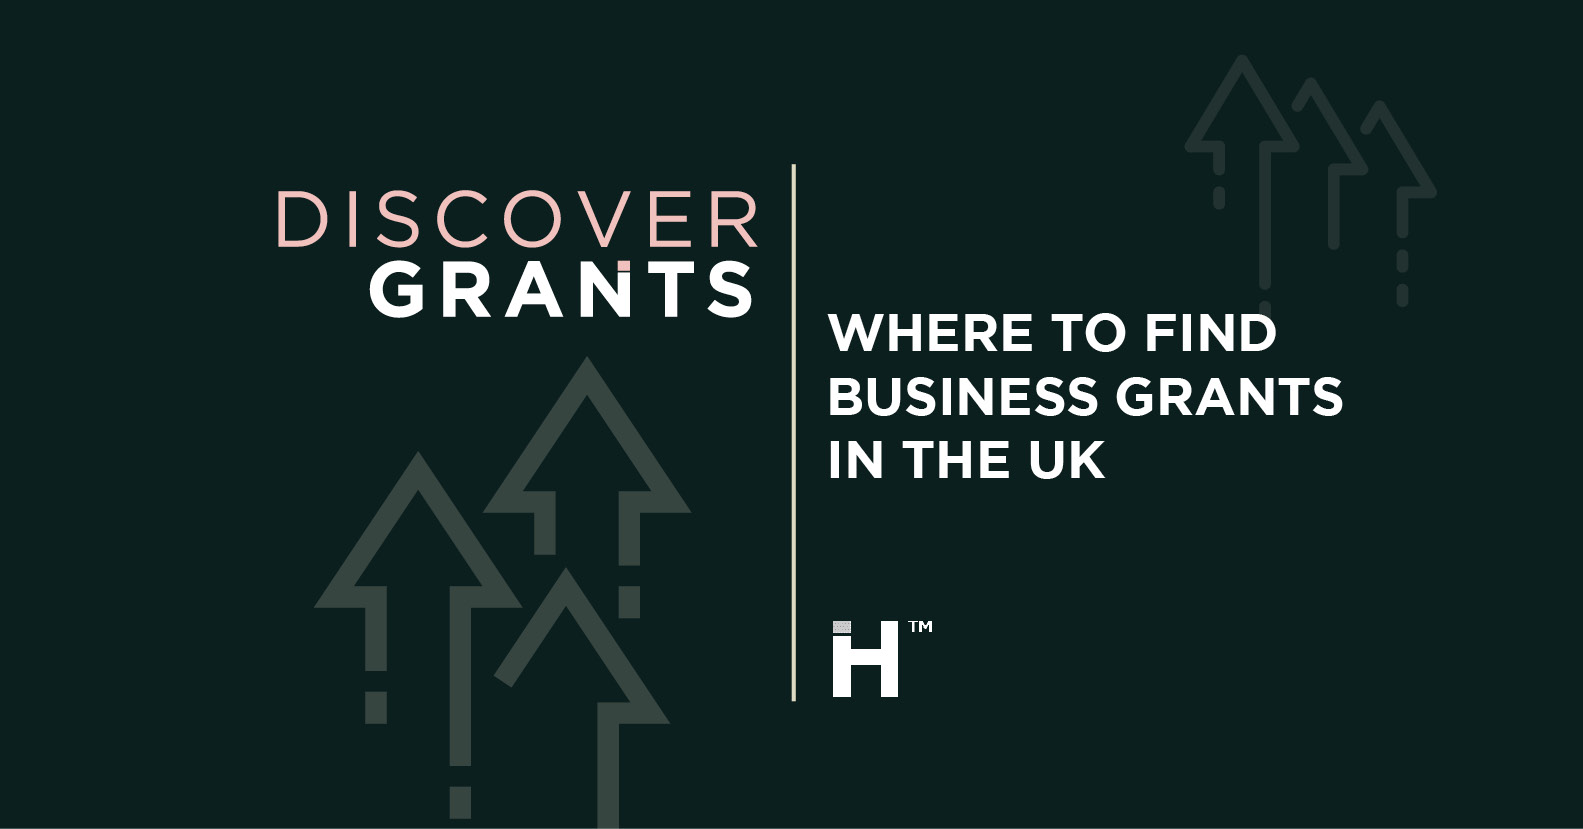 How Can I Win Business Grants in the UK?